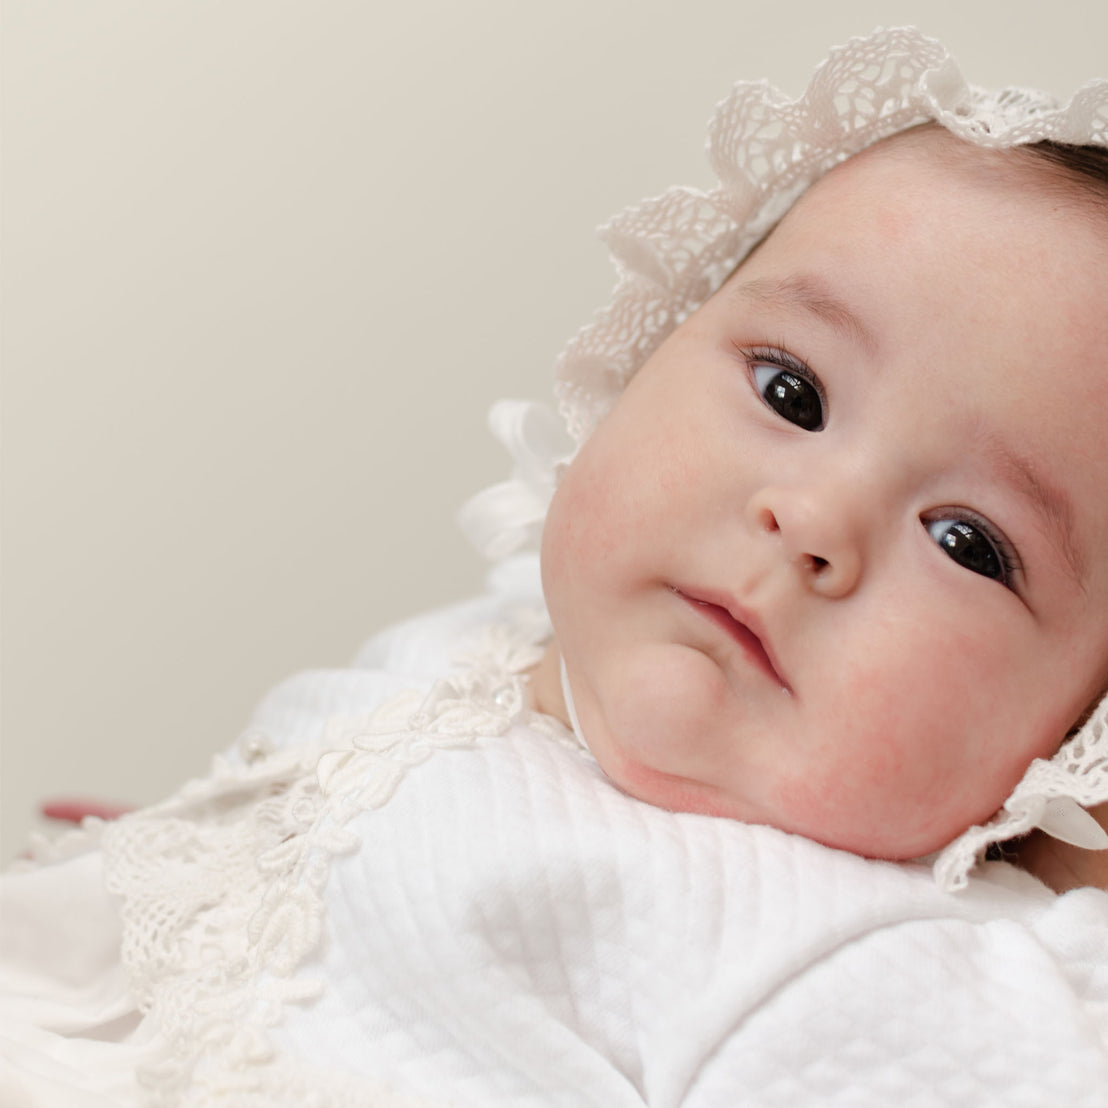 Baby wearing the Lily Quilted Cotton Bonnet. Photo shows the ruffle detail that frames her face